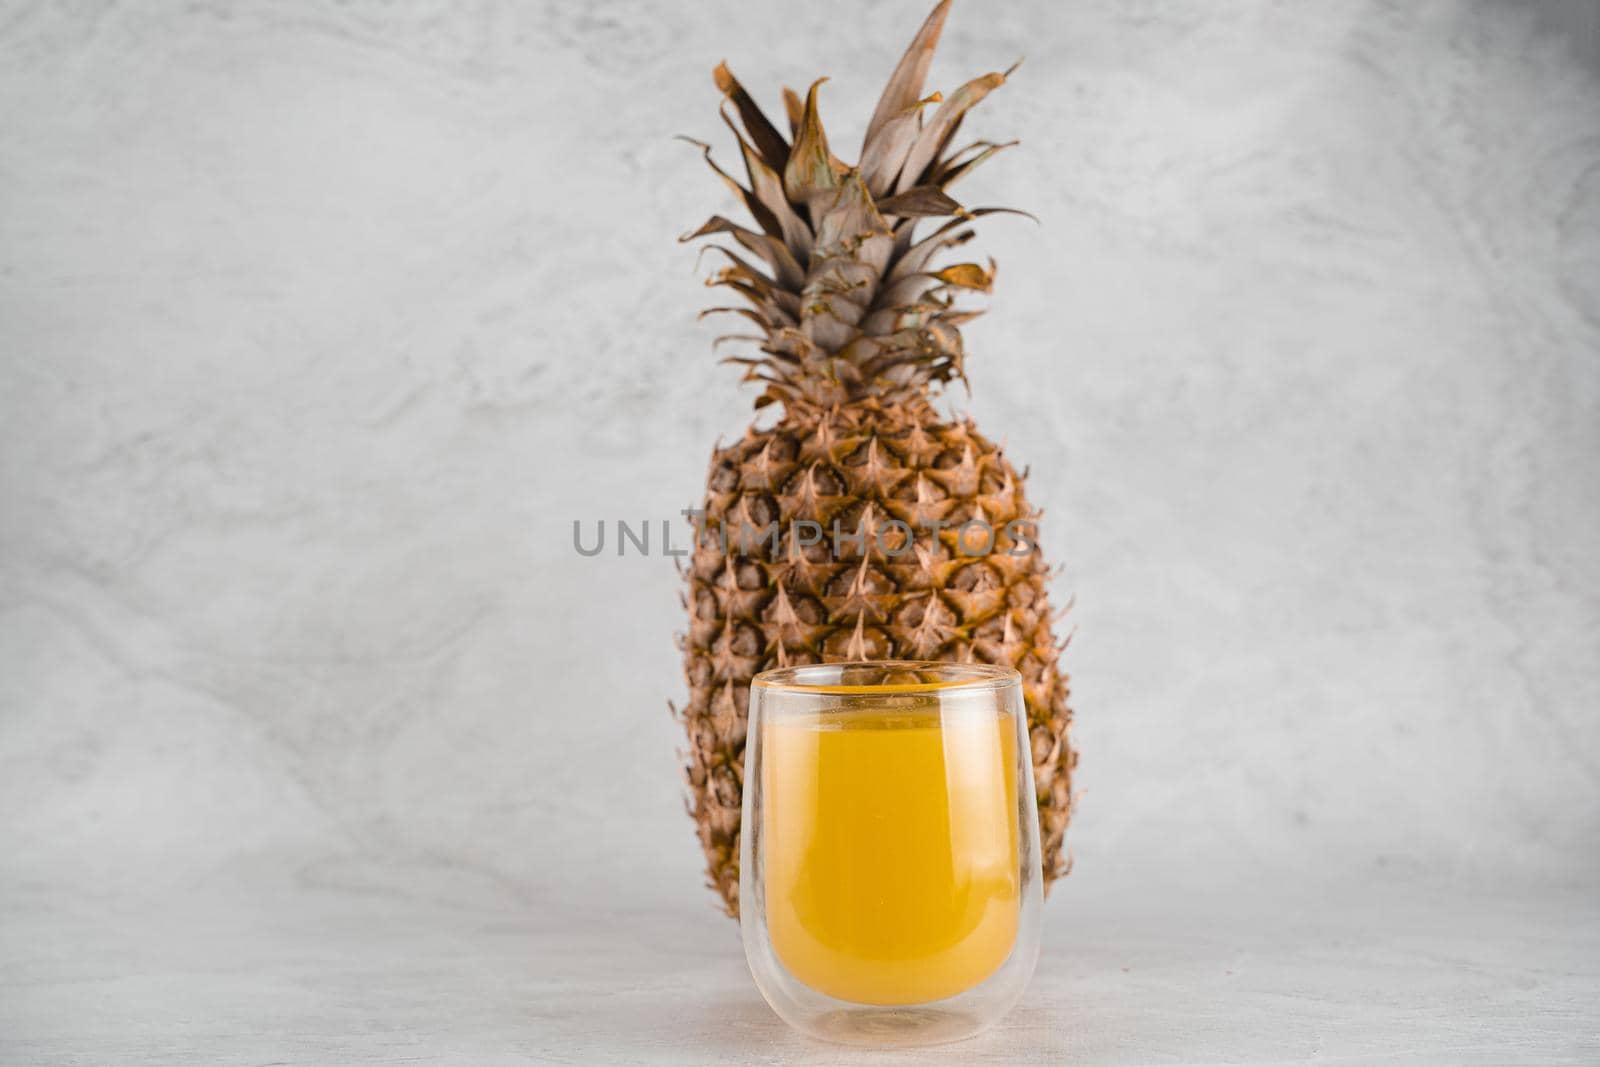 Pineapple fruit and juice in double glass cup on white stone background. Pouring yellow tropical fruit juice into glass. by Rabizo